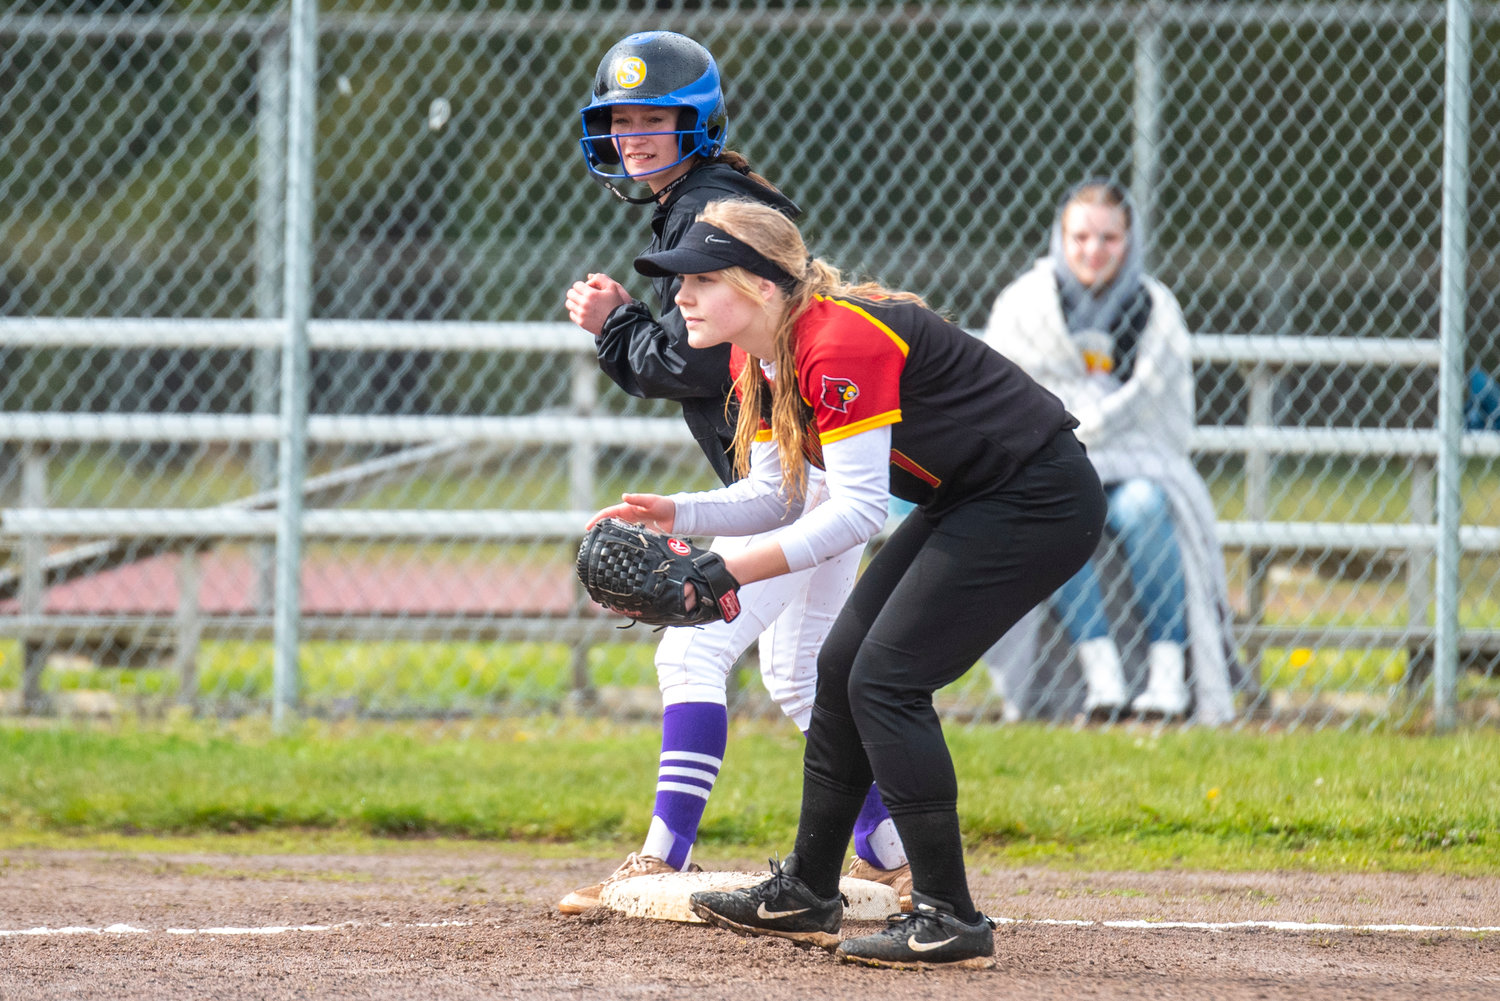 Onalaska's Desi Smith stands on third base while Winlock third baseman awaits the next pitch during a game in Winlock on April 21.